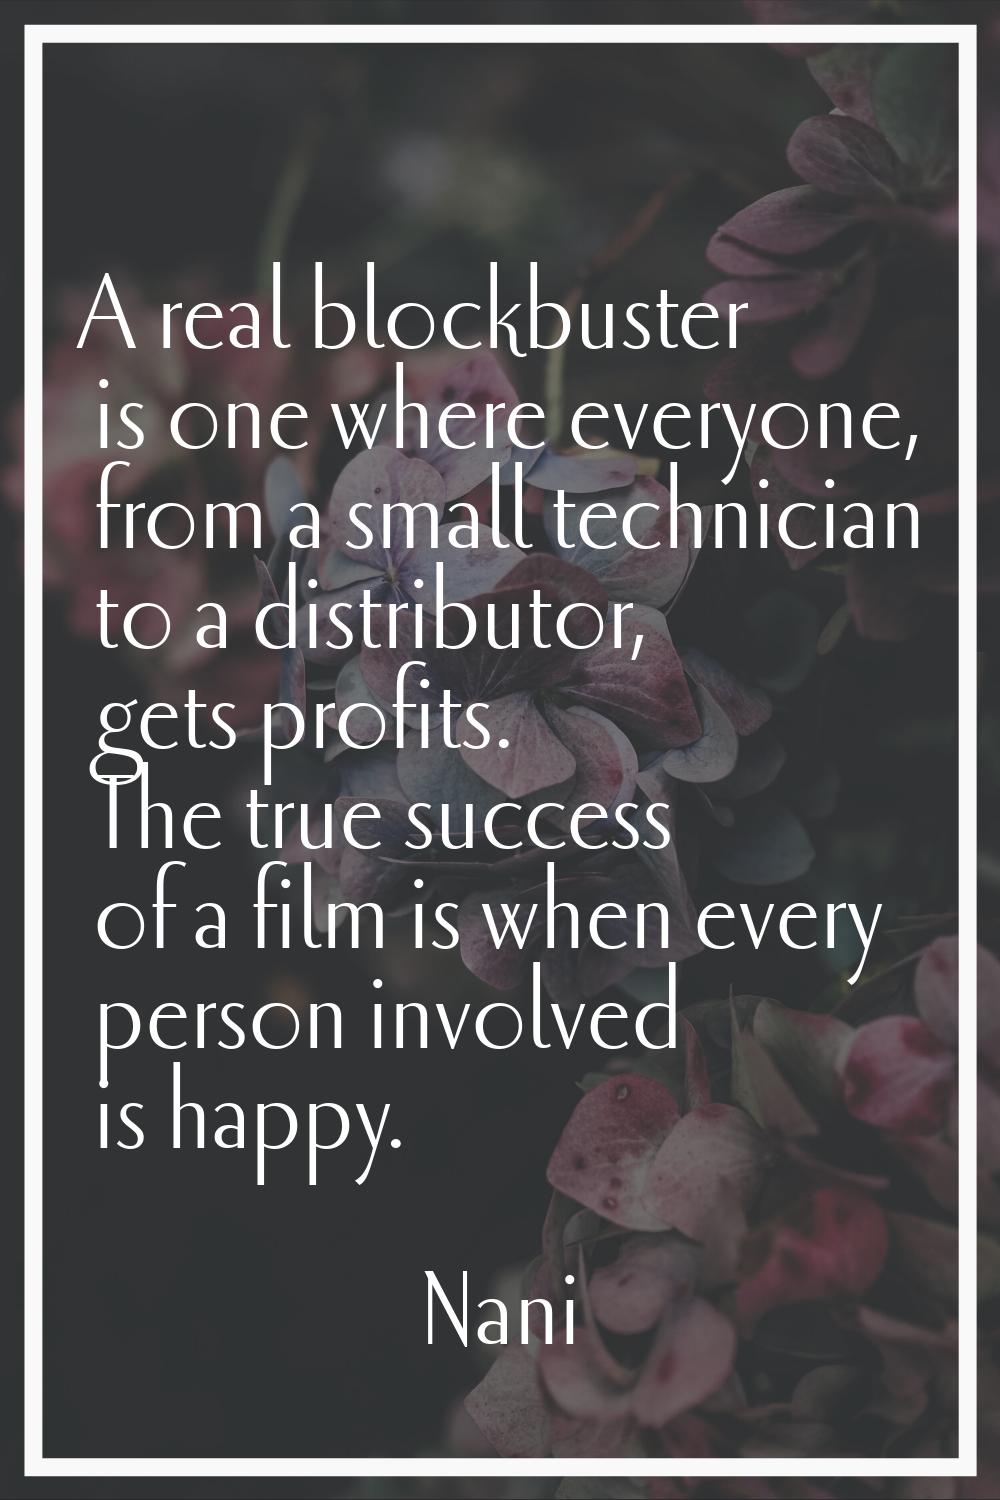 A real blockbuster is one where everyone, from a small technician to a distributor, gets profits. T